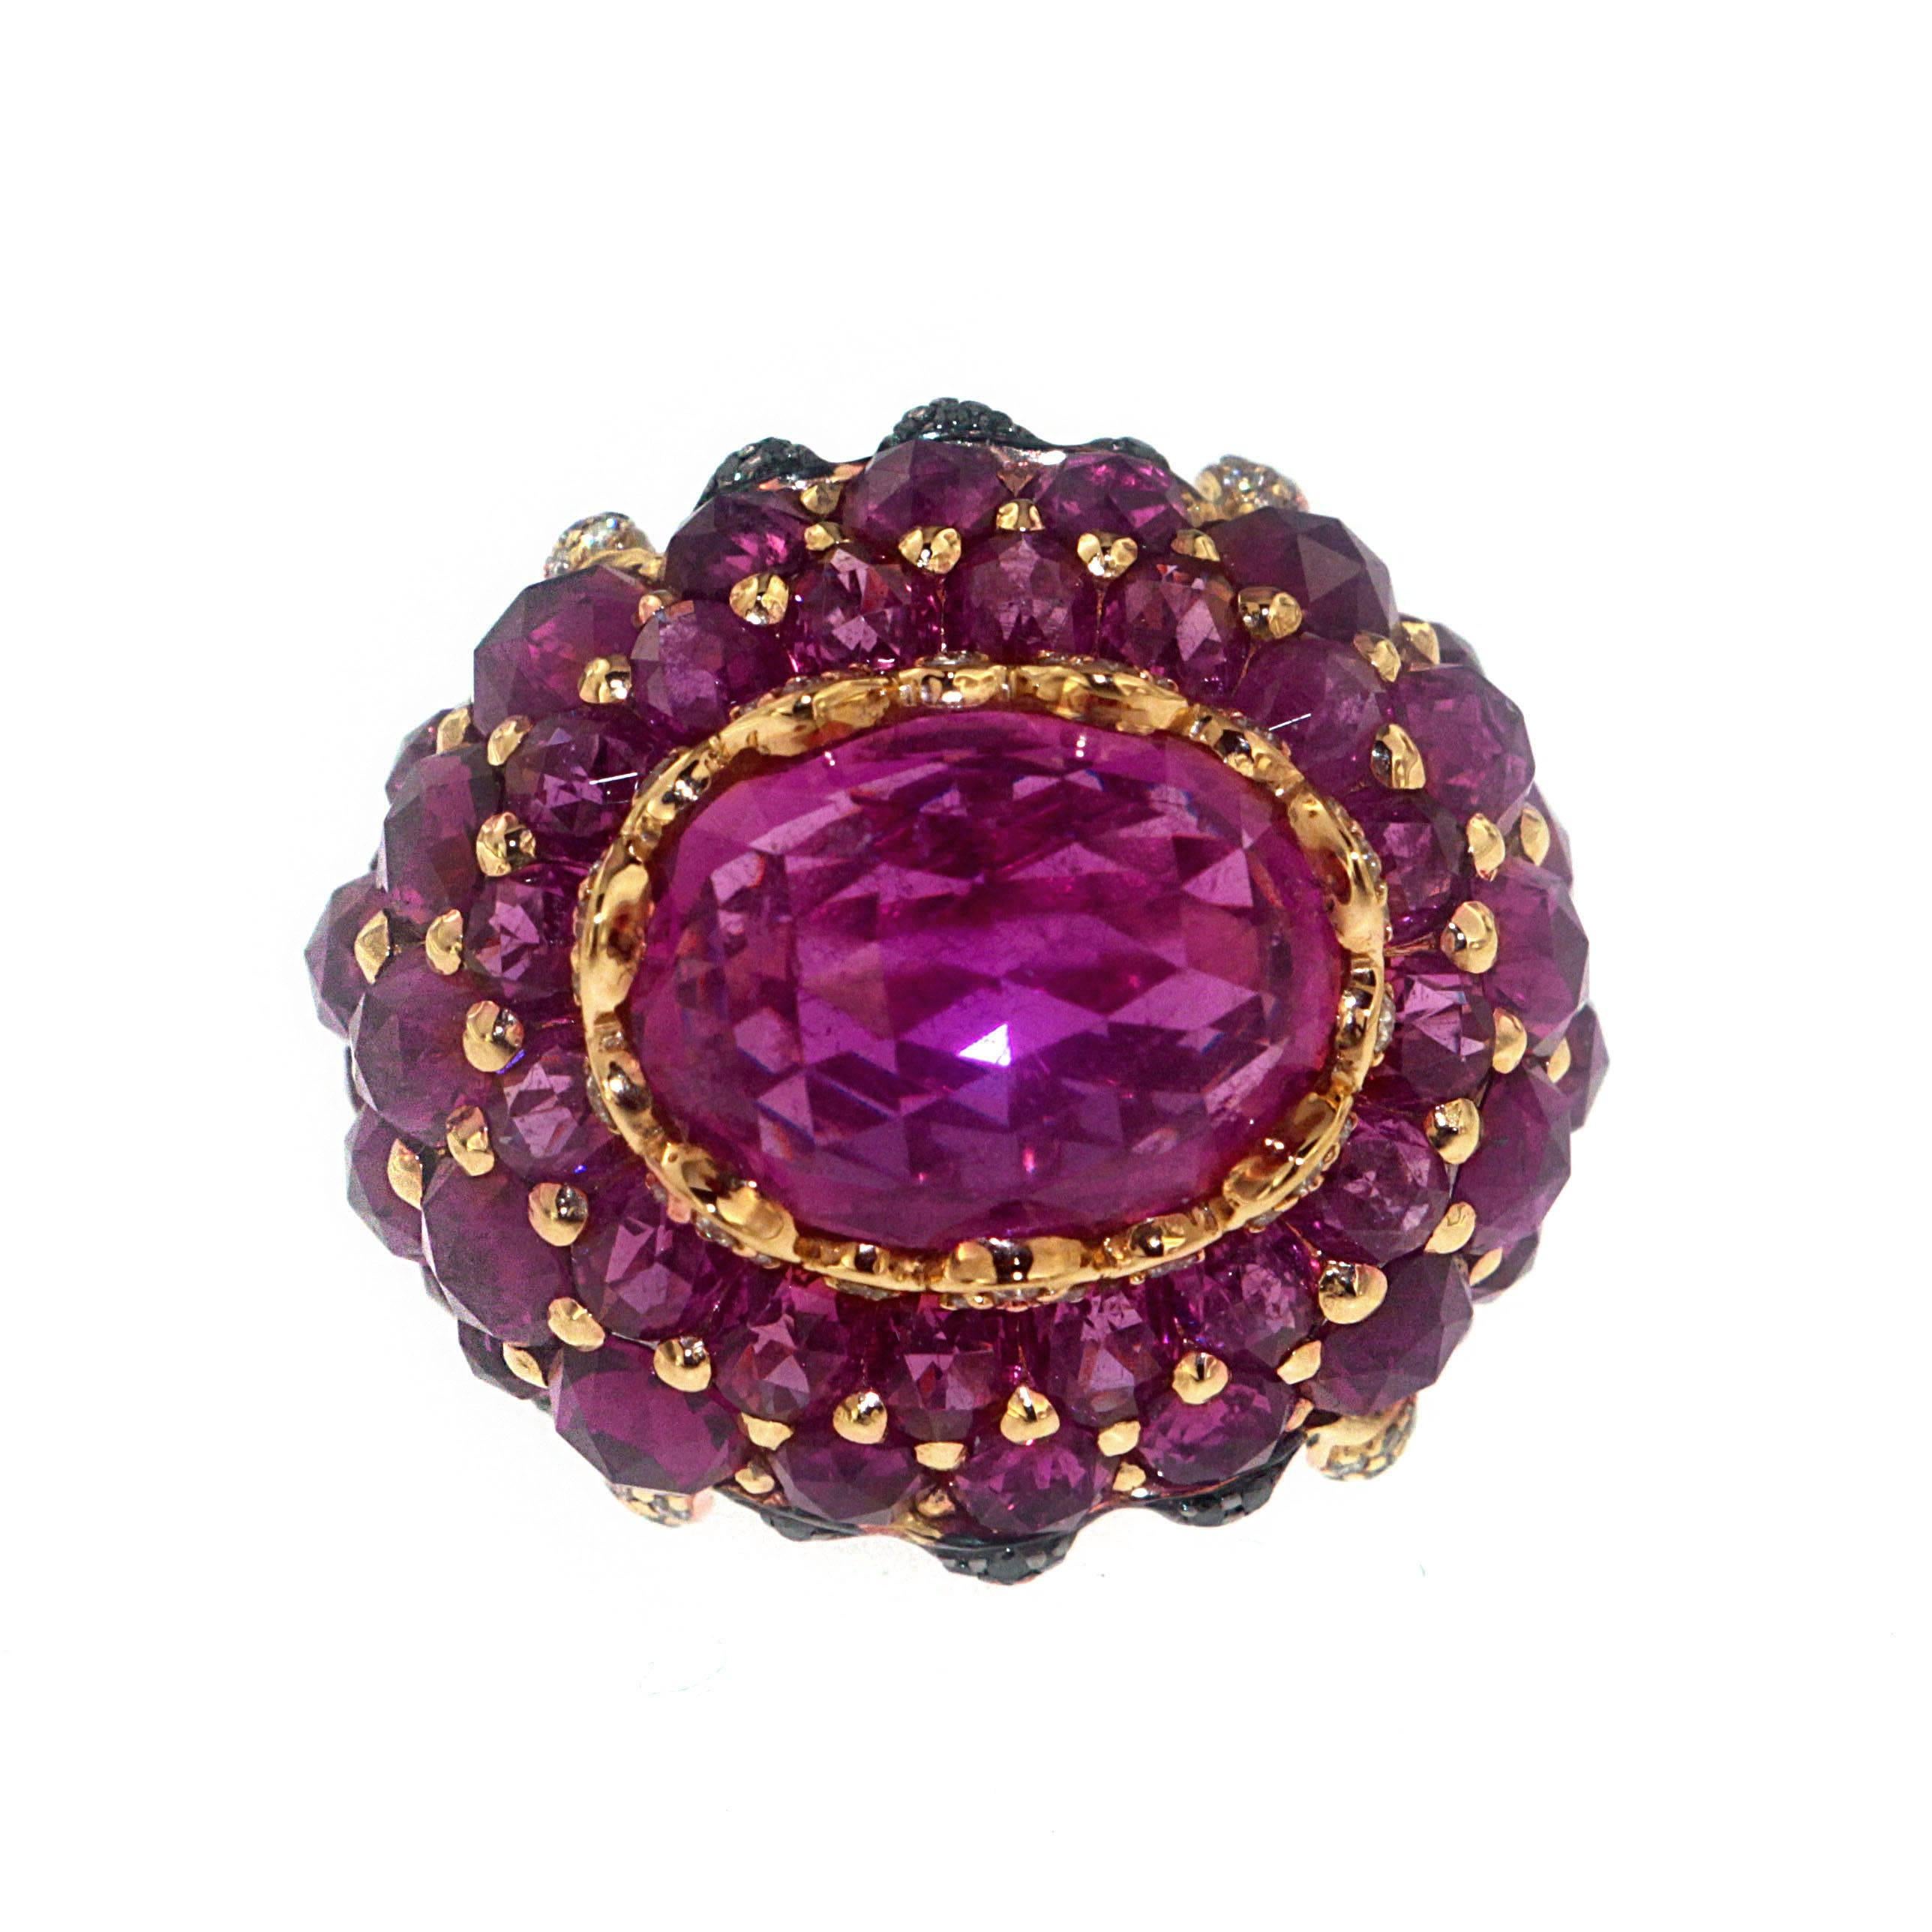 Indulge your sweet tooth with this stunning Multi-faceted cut Rubellite cocktail ring draped in Rubellite totaling 30.53 Carats. This original Zorab masterpiece is embellished with 0.54 Carats of treated Black Diamonds and 0.61 Carats of White